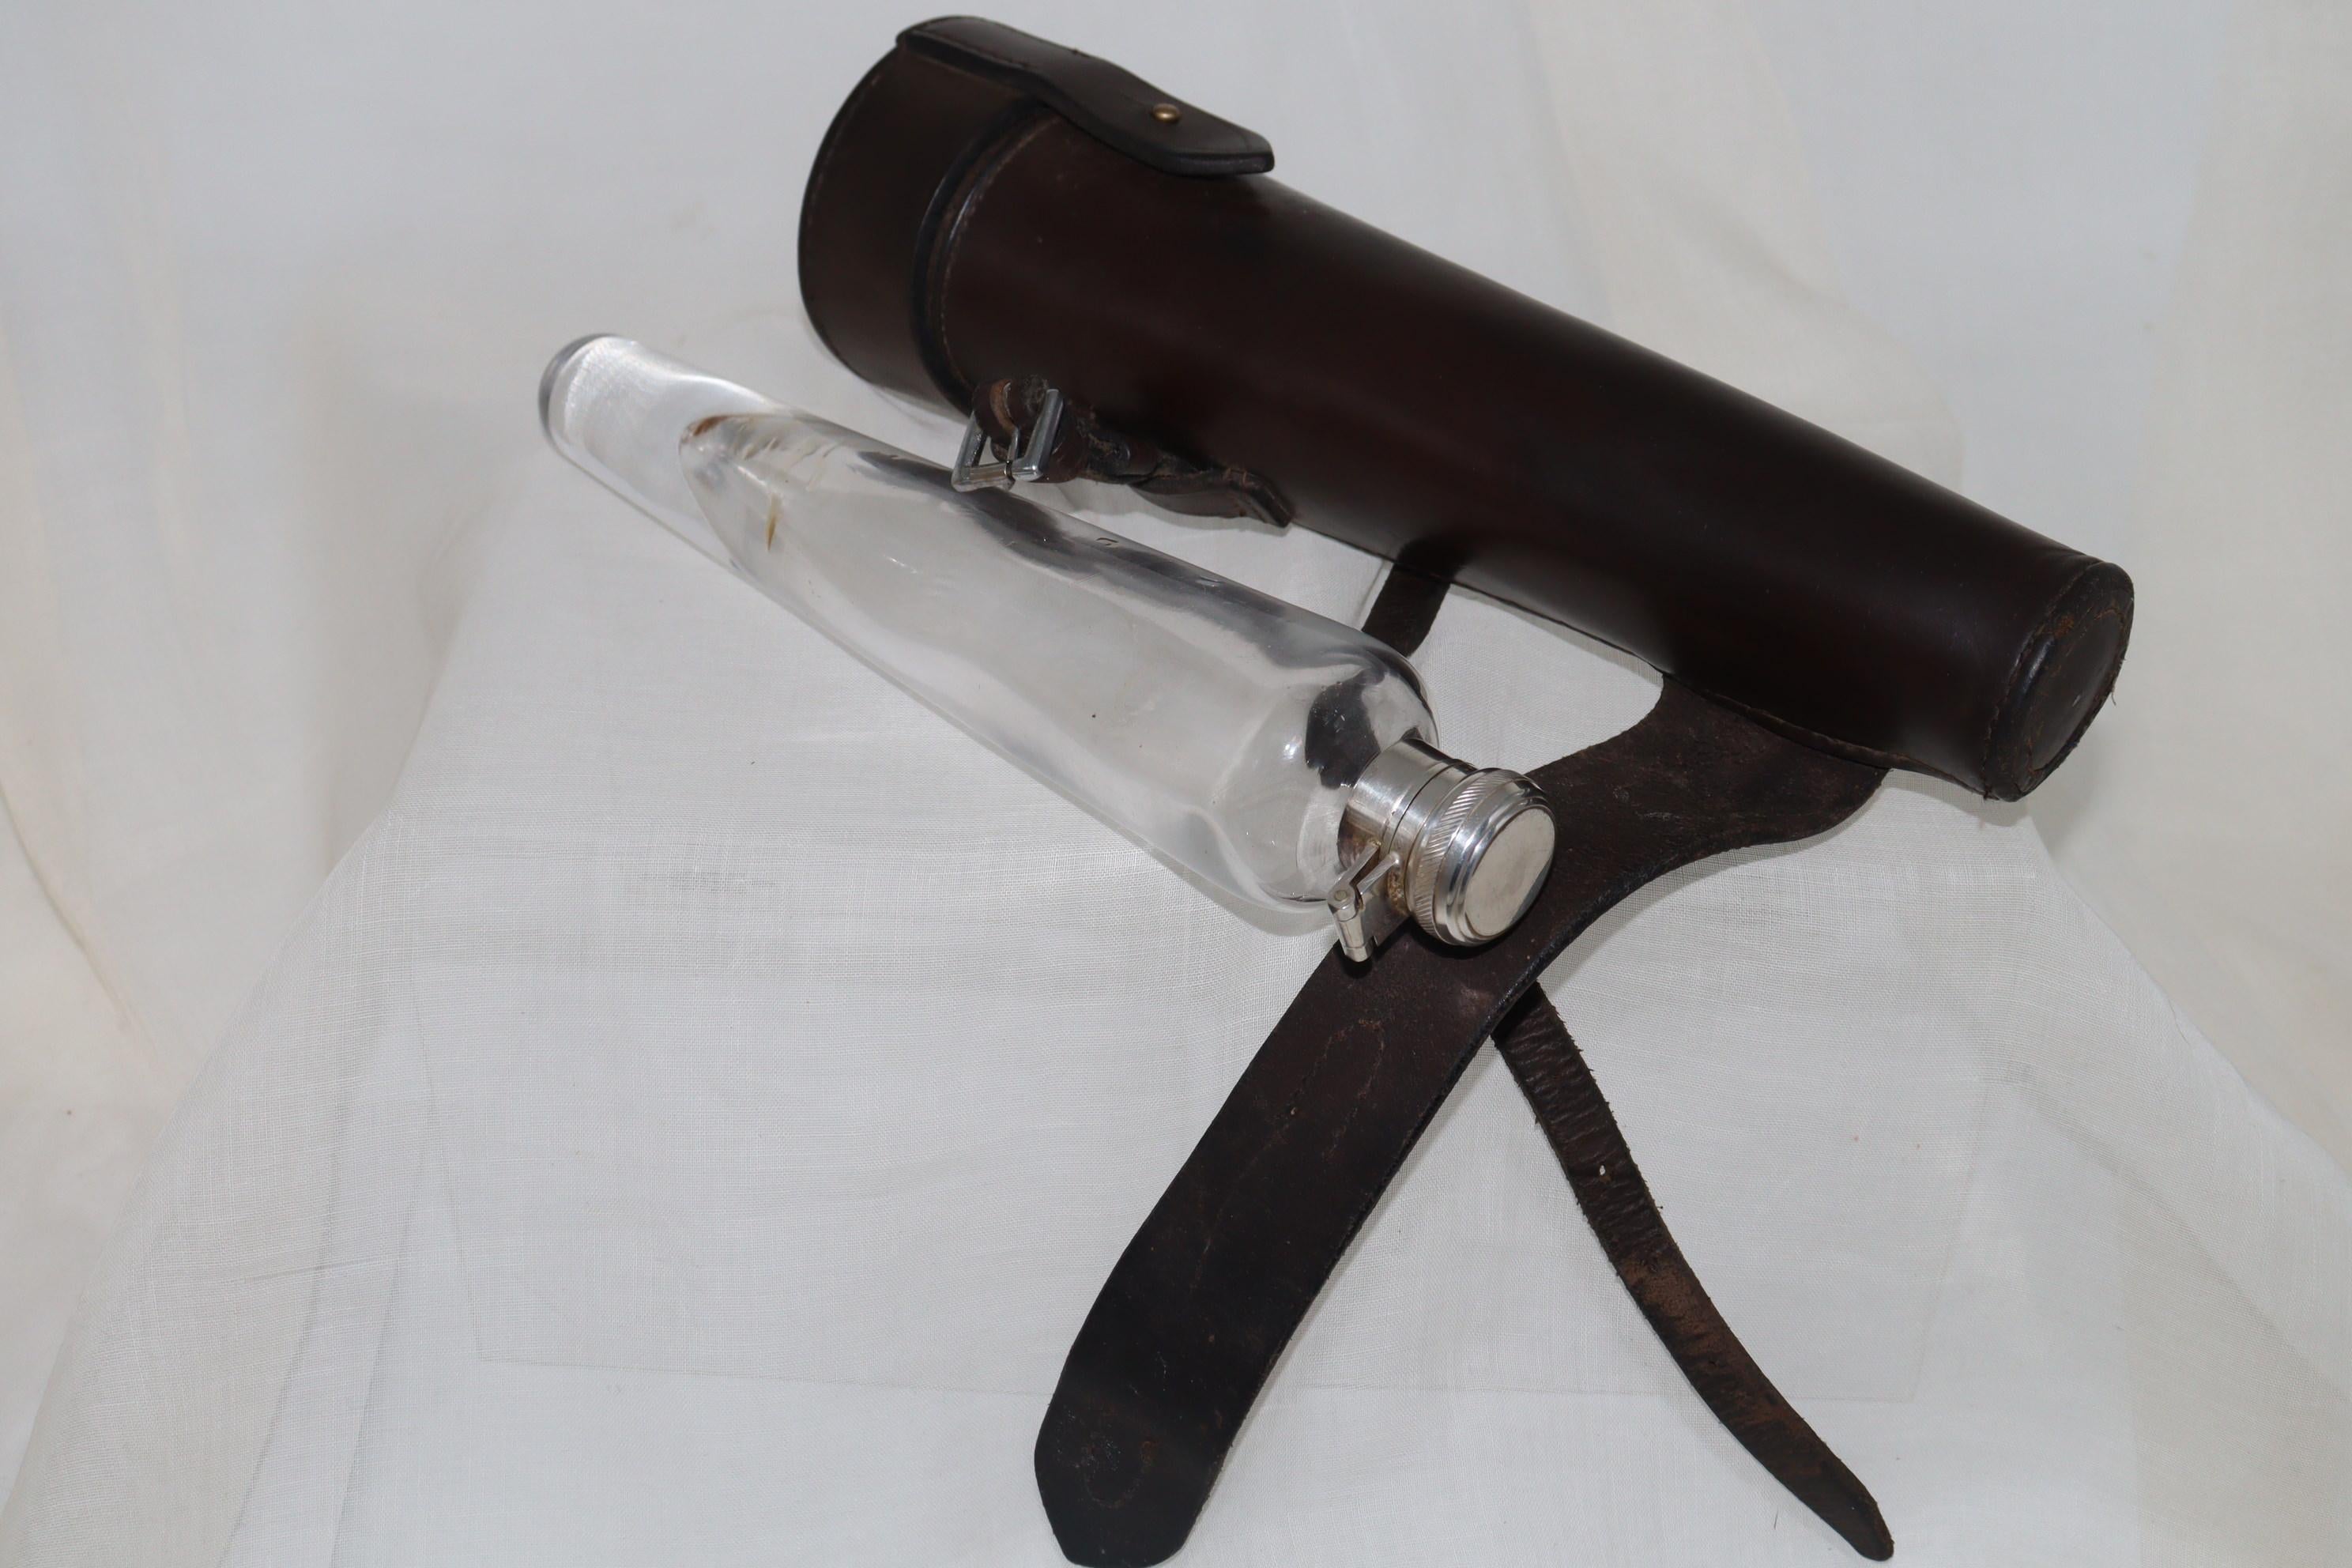 This heavy glass hunting flask is housed in its nicely made leather case, ready to strap to the saddle. To hold the contents, the flask is fitted with a silver plated lid secured with a twisting action to release the bayonet fitting. The leather